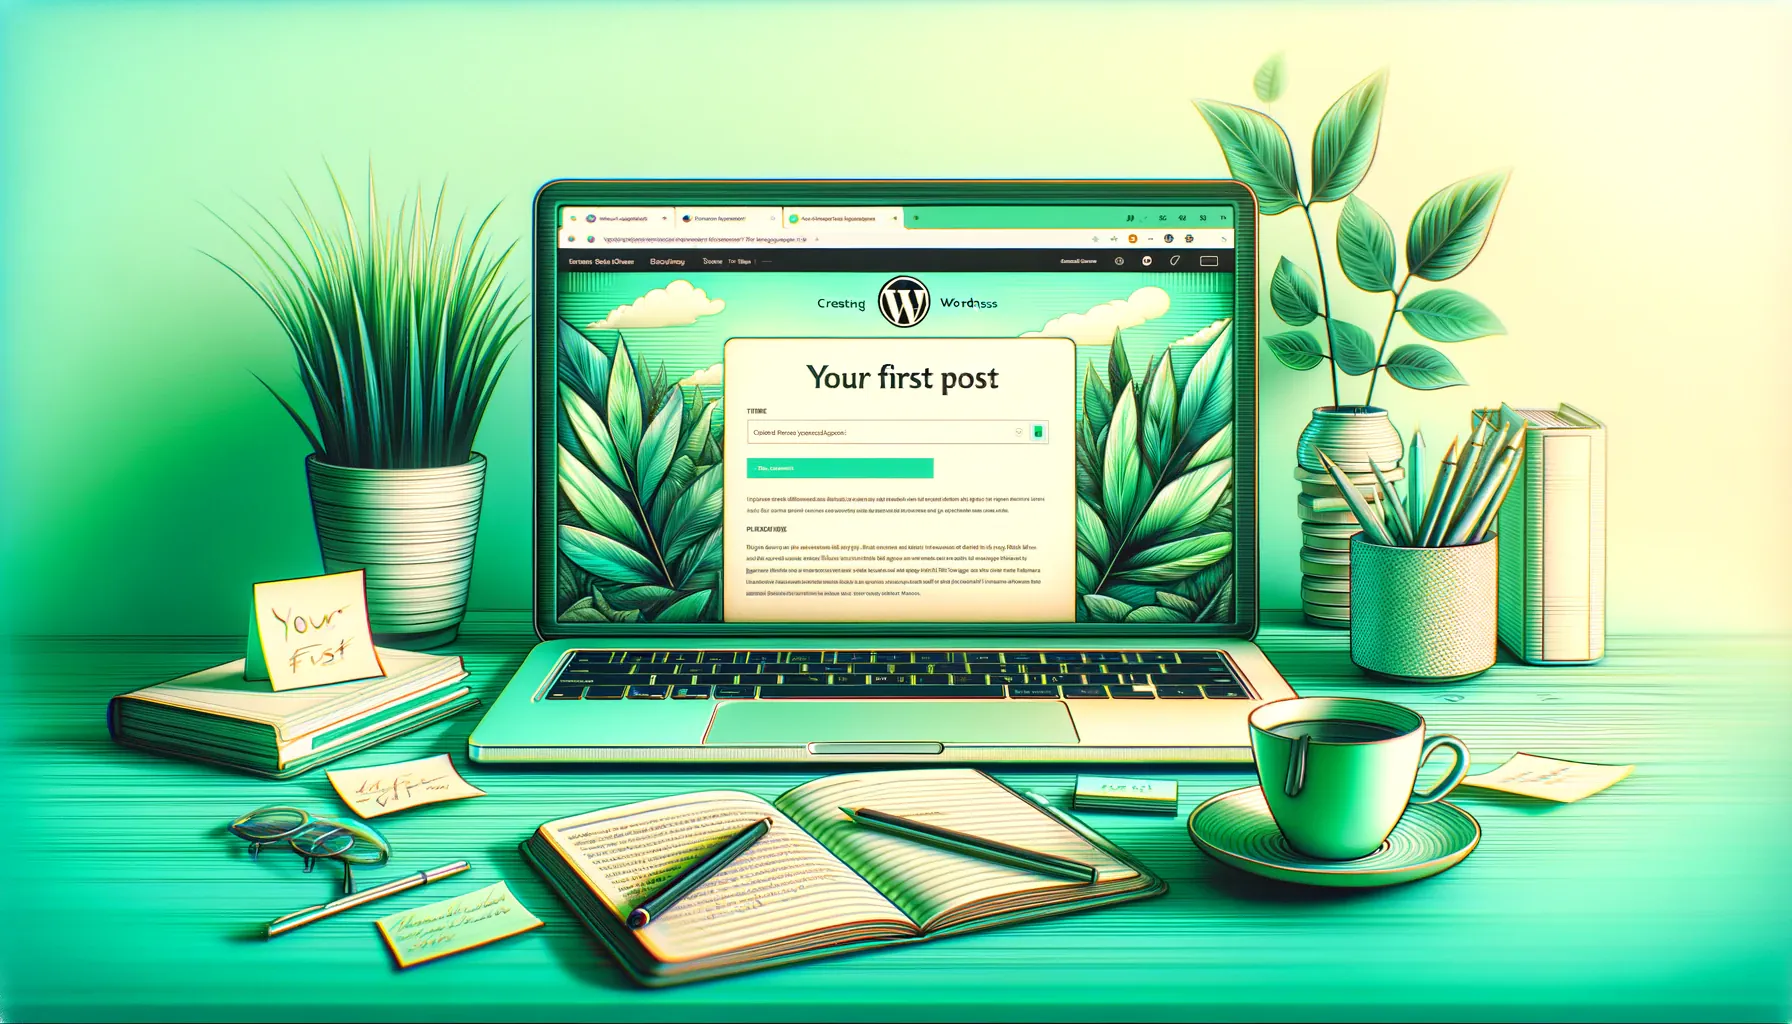 Image of a minimalist workspace with a laptop displaying 'Your First Post' on WordPress, surrounded by notes, green tea, and a plant, set against a green gradient background.